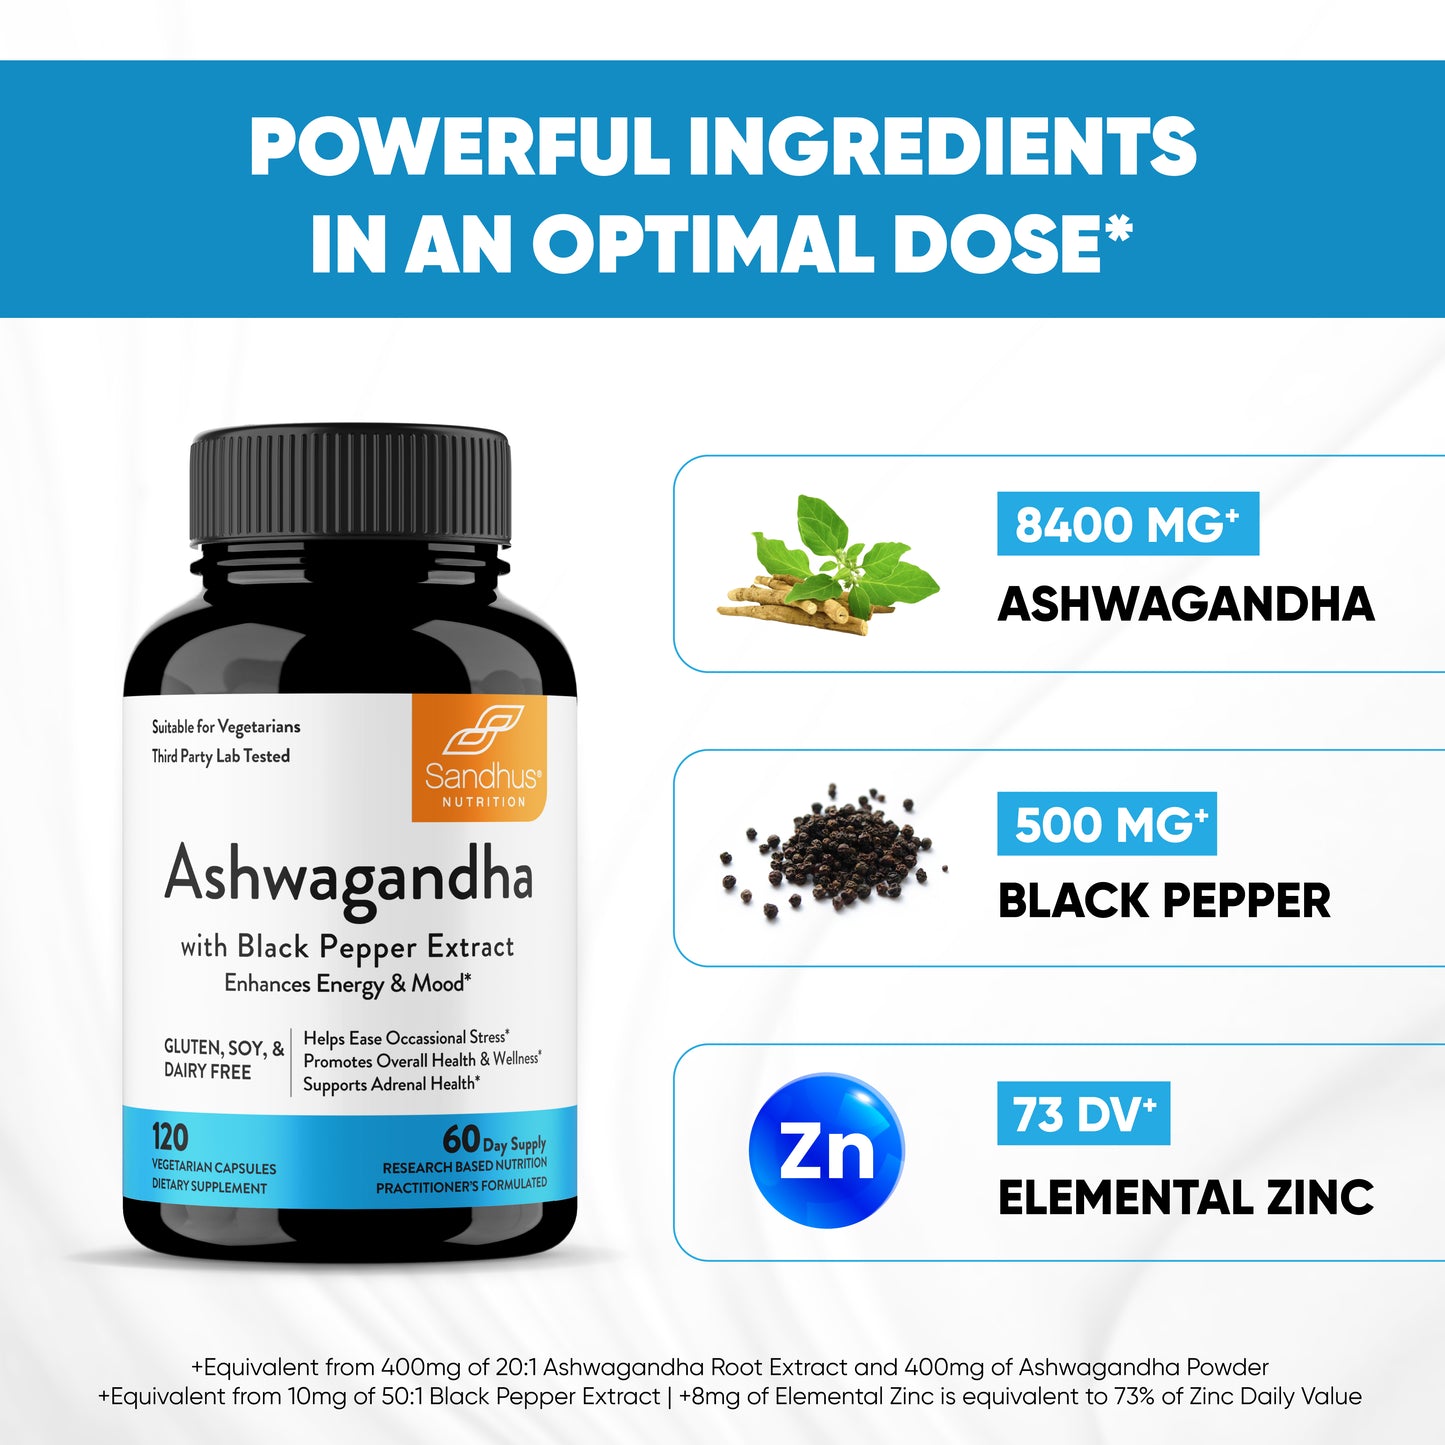 Ashwagandha with Black Pepper Extract Capsules 120 Ct